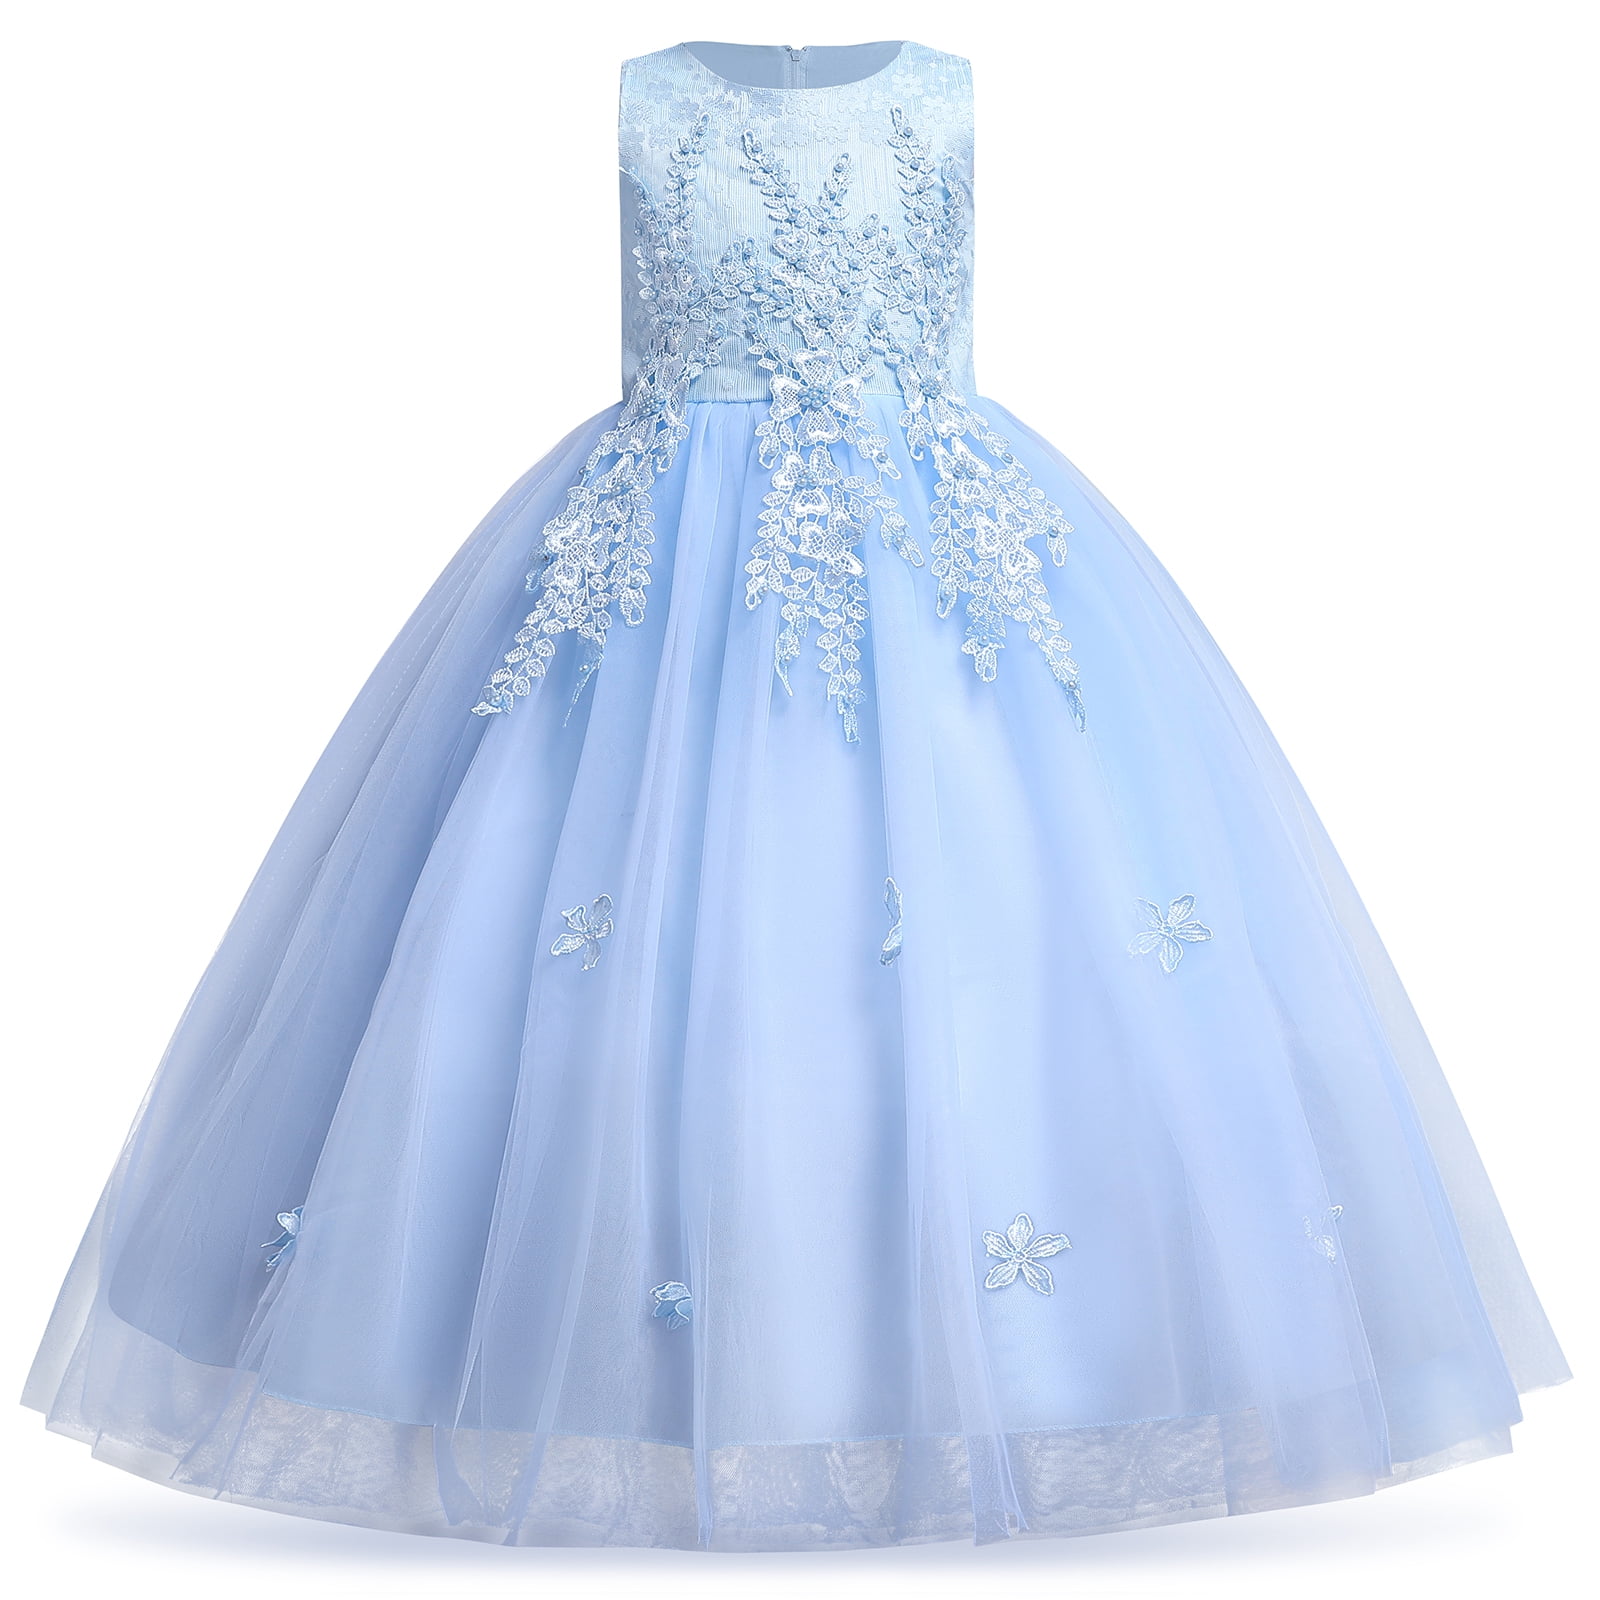 DOLYKUI 3-8 Years Girls Dress, Kids Girls Cosplay Princess Bridesmaid  Pageant Gown Birthday Party Dress, Enjoy DOLYKUI Shopping Mall, Christmas  Party Clothes New Year Gift price in UAE | Amazon UAE | kanbkam